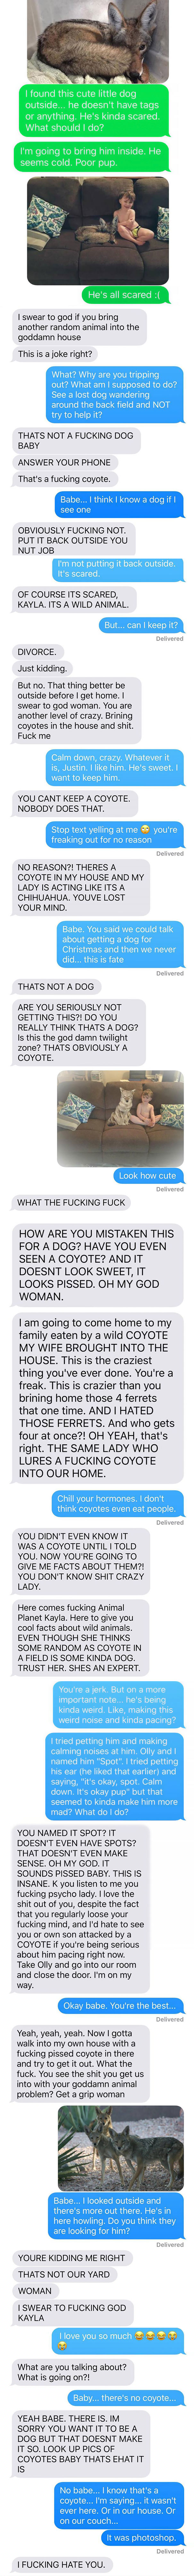 Wife Pranked Her Husband With A Coyote, Photoshopped Into Their Home